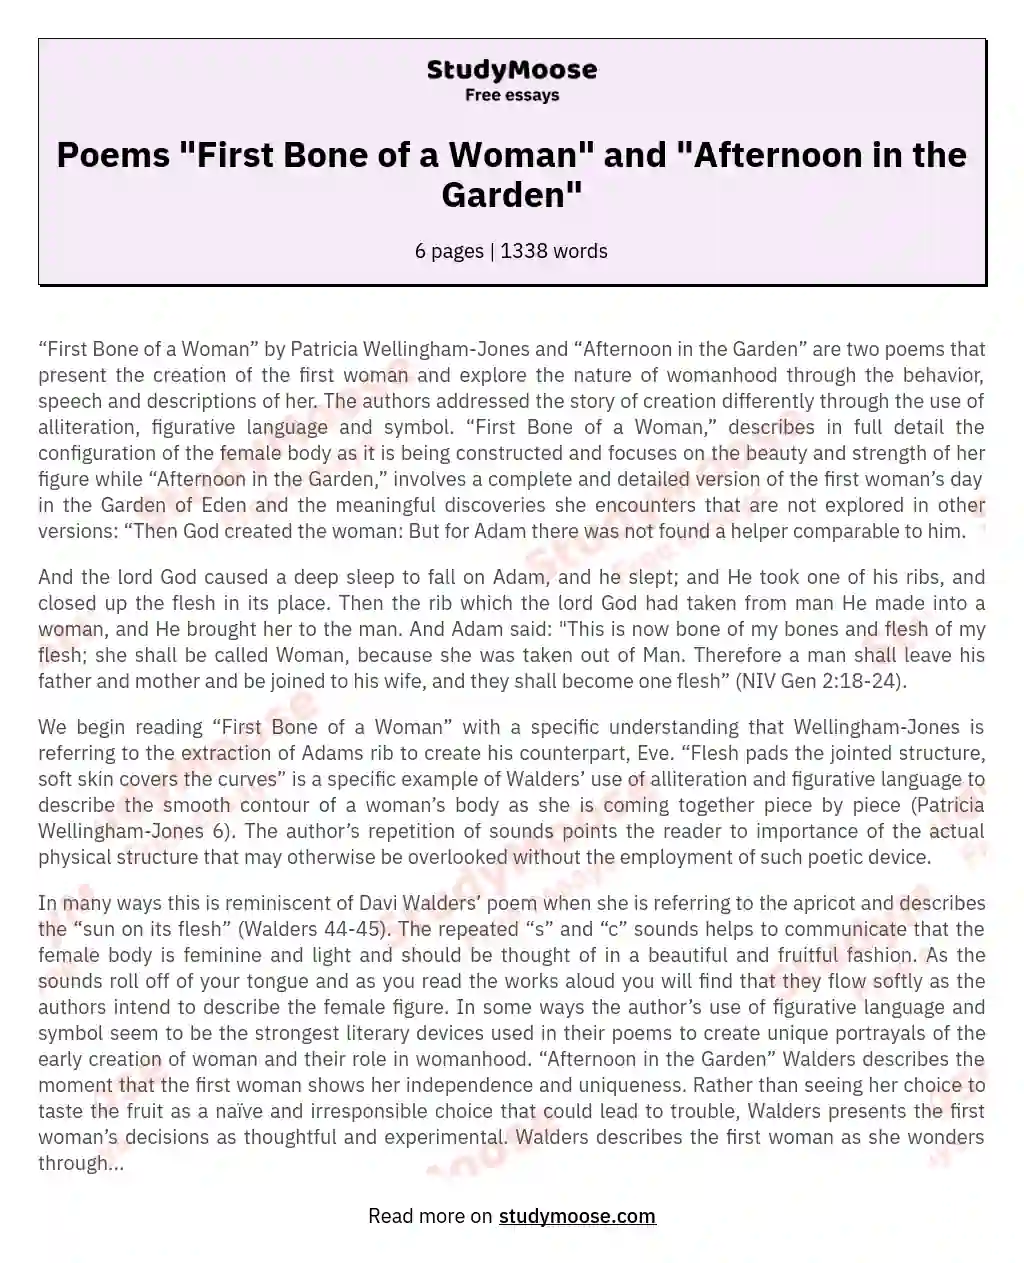 Poems "First Bone of a Woman" and "Afternoon in the Garden" essay